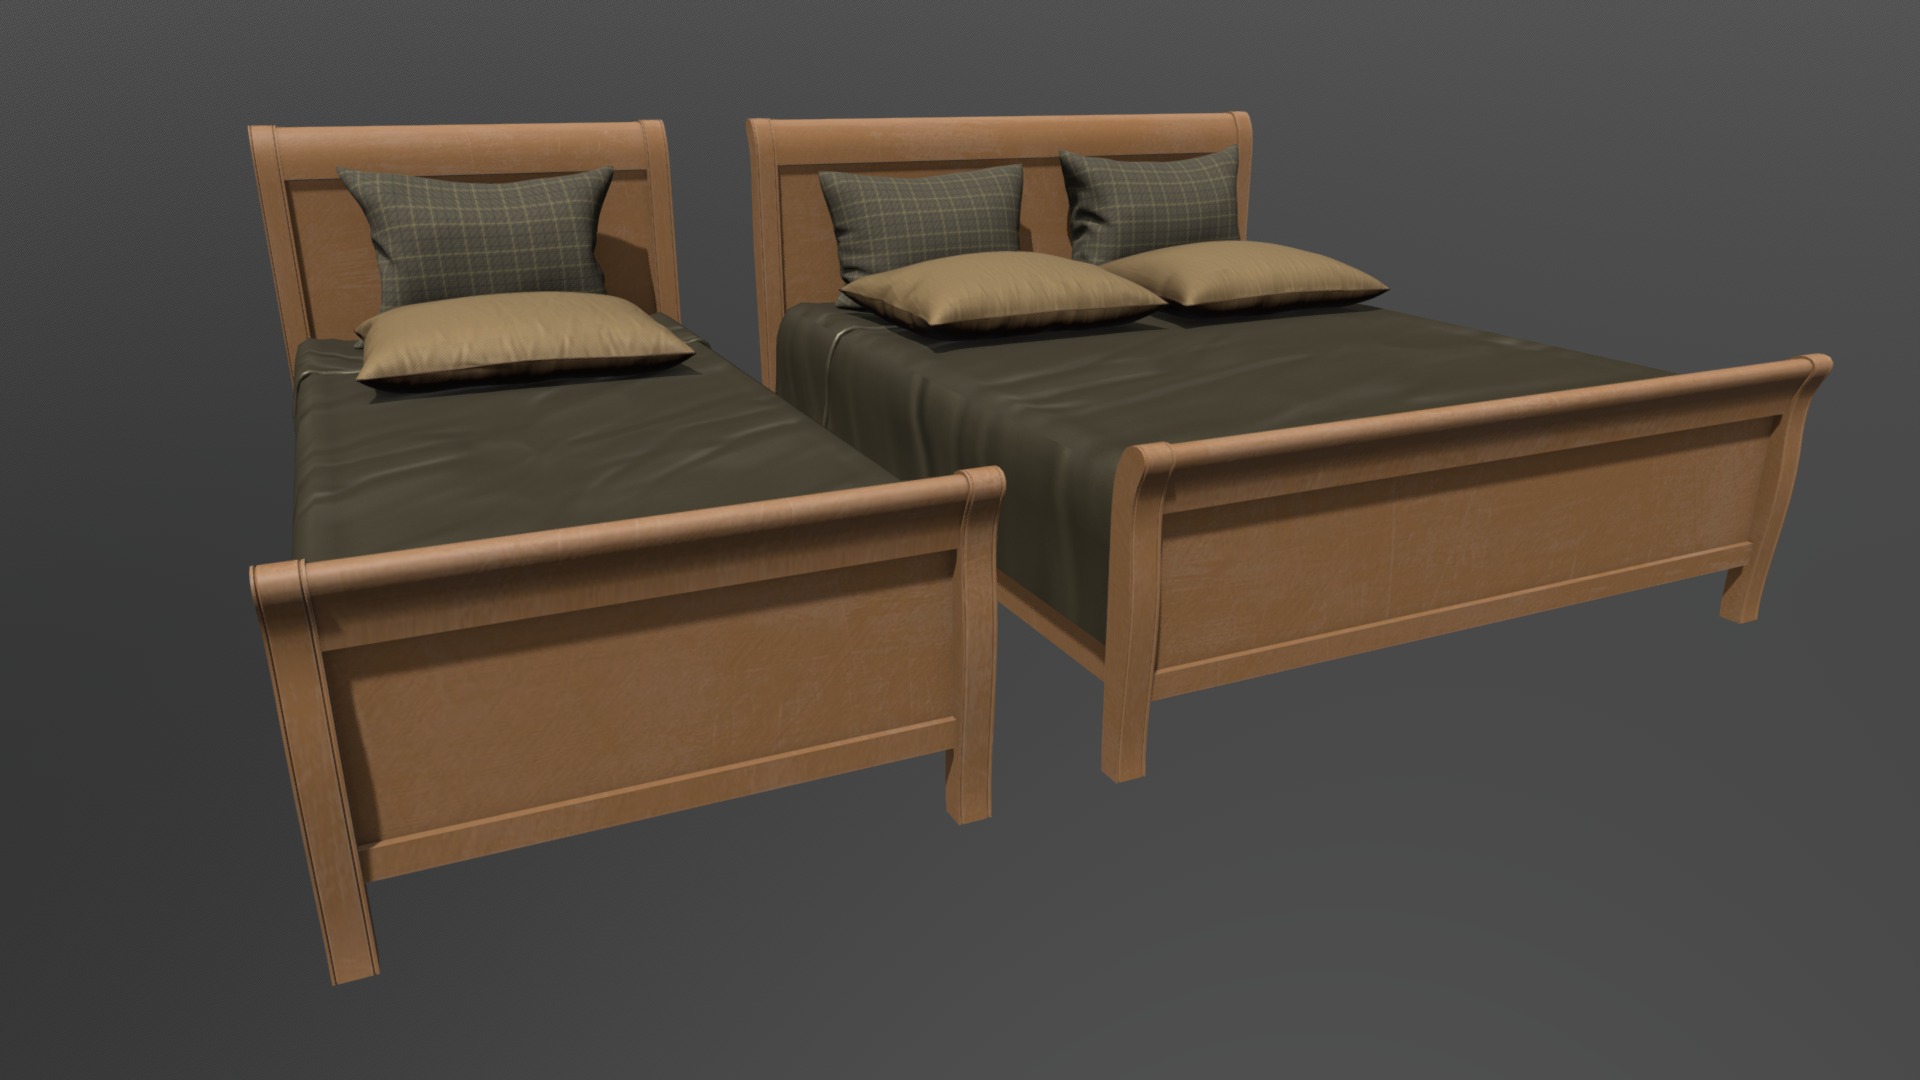 3D model Beds - This is a 3D model of the Beds. The 3D model is about a couple of beds.